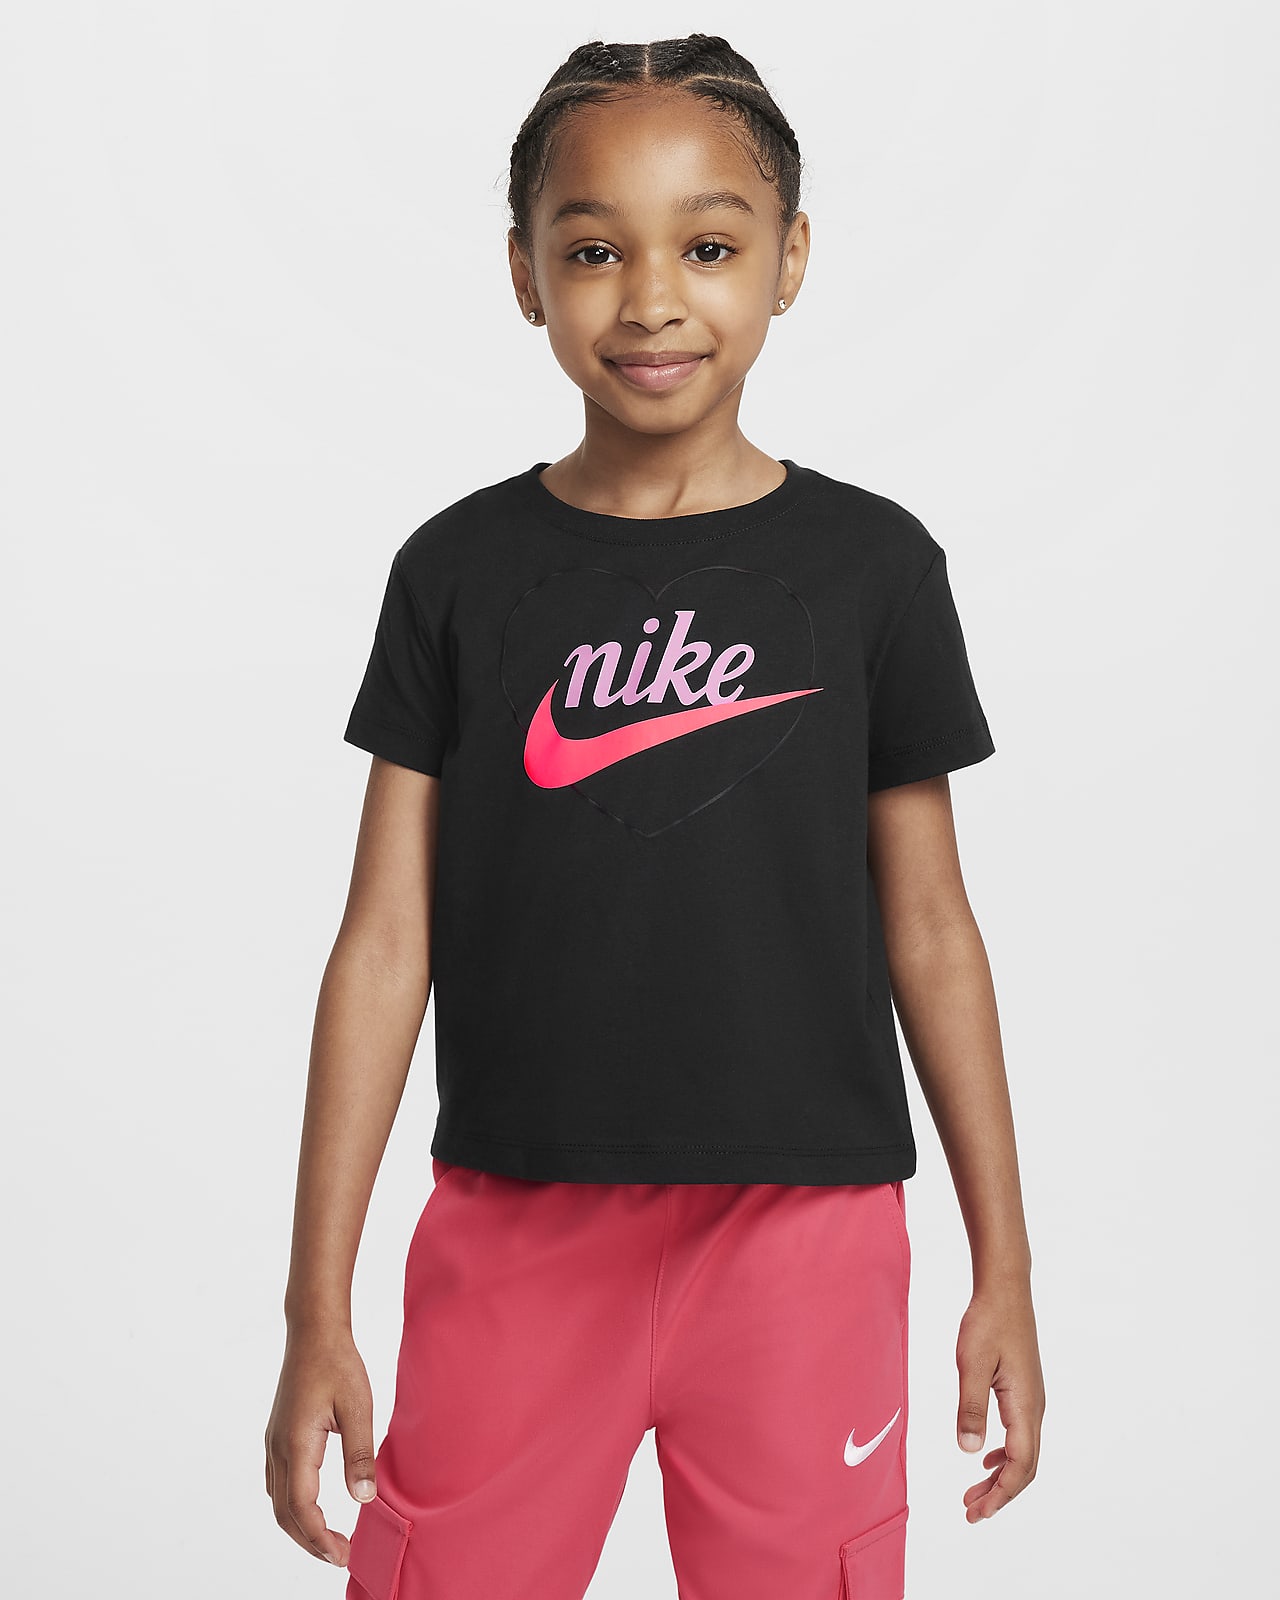 Nike New Impressions Little Kids' Heart Graphic T-Shirt